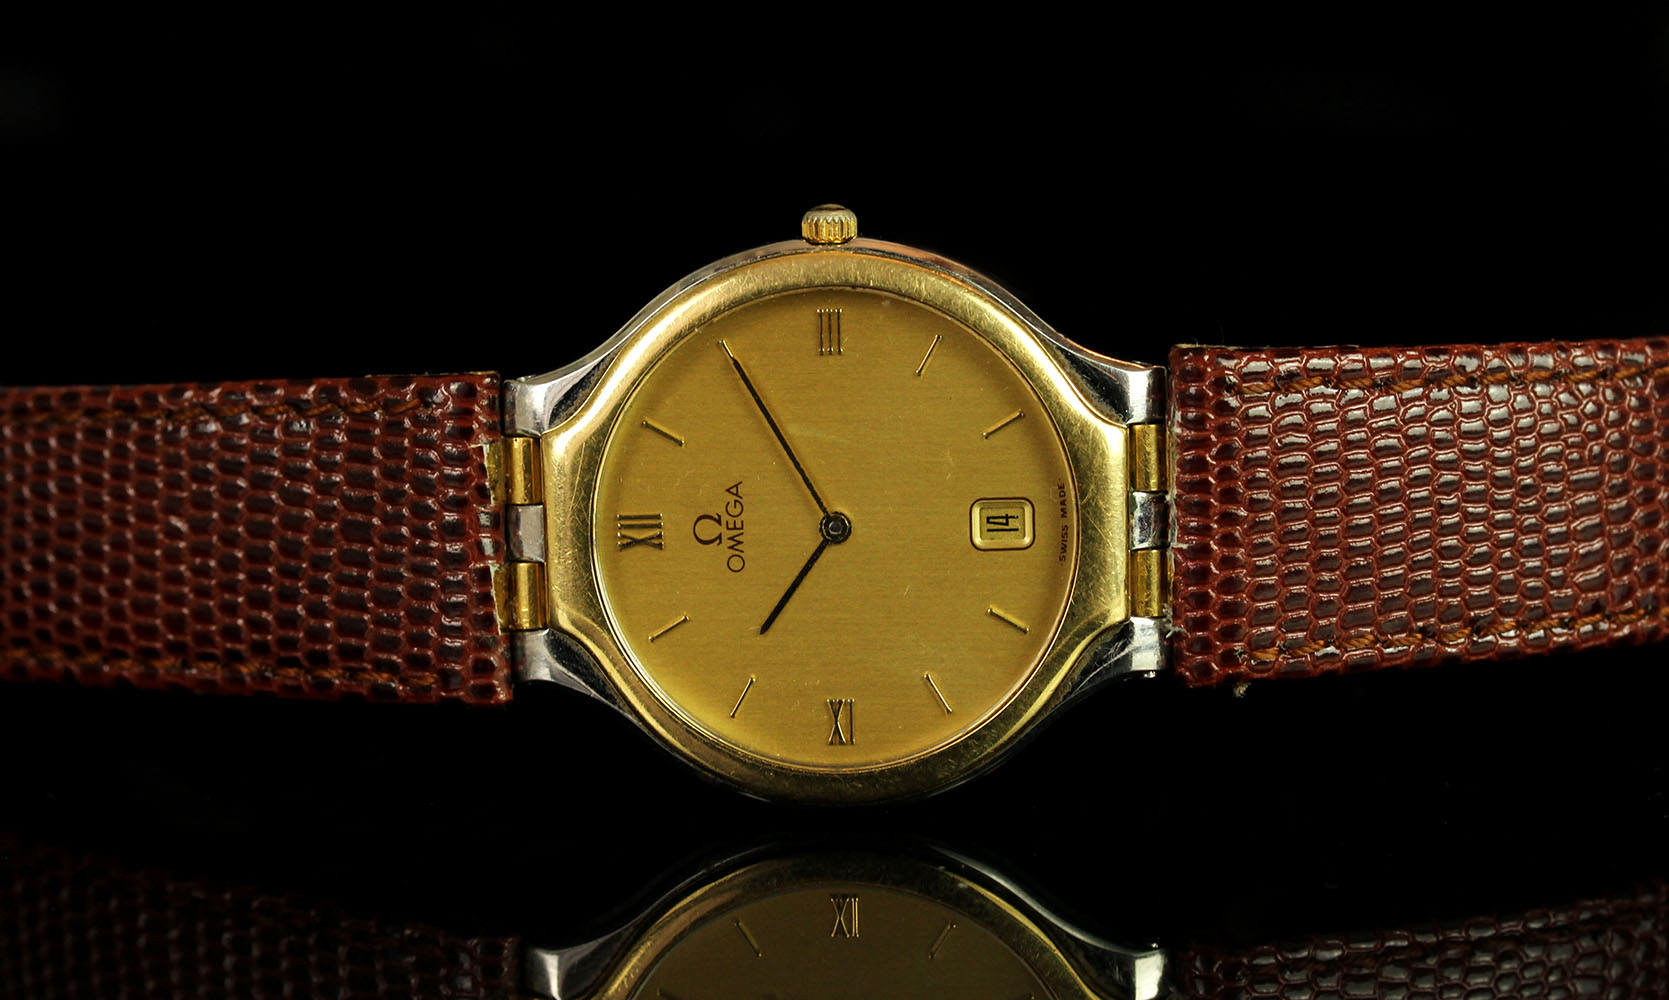 GENTLEMENS OMEGA QUARTZ WRISTWATCH, circular gold dial with roman numerals and date window, 32mm